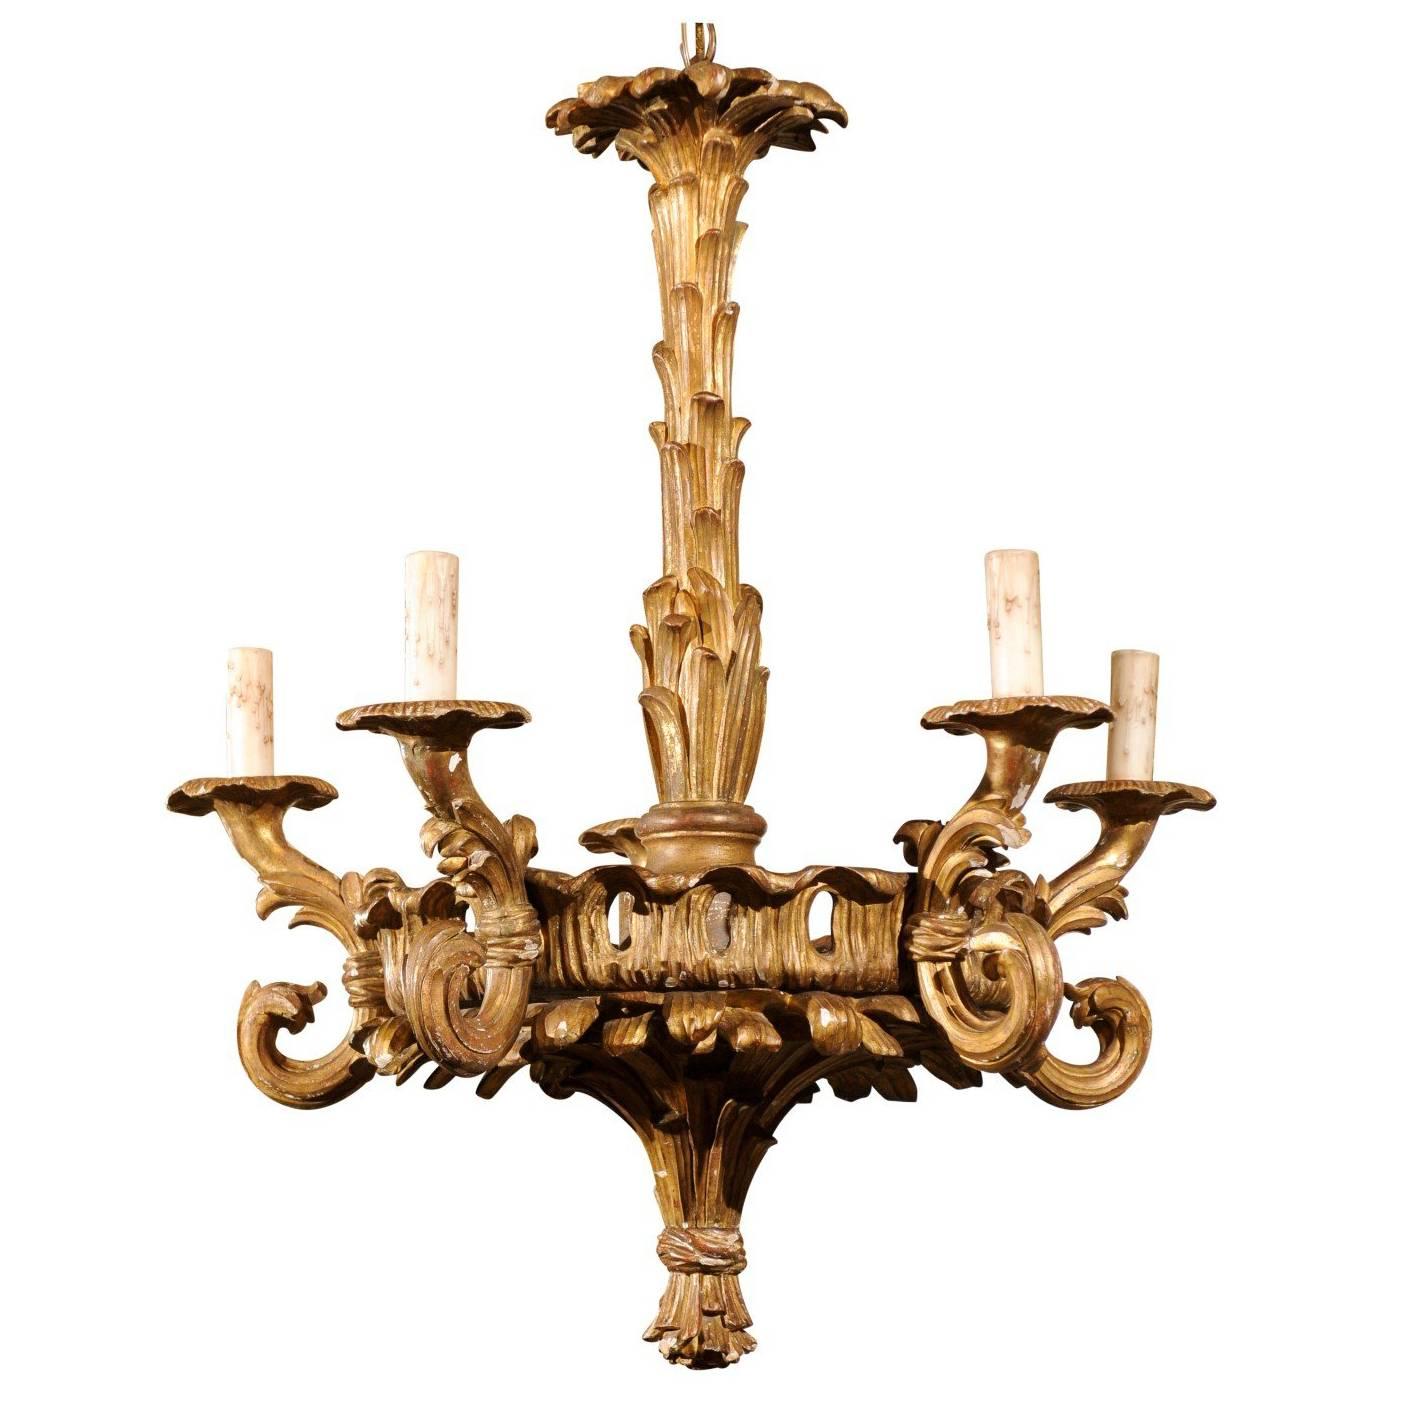 French Five-Light Foliage Themed Giltwood Carved Chandelier, Early 20th Century